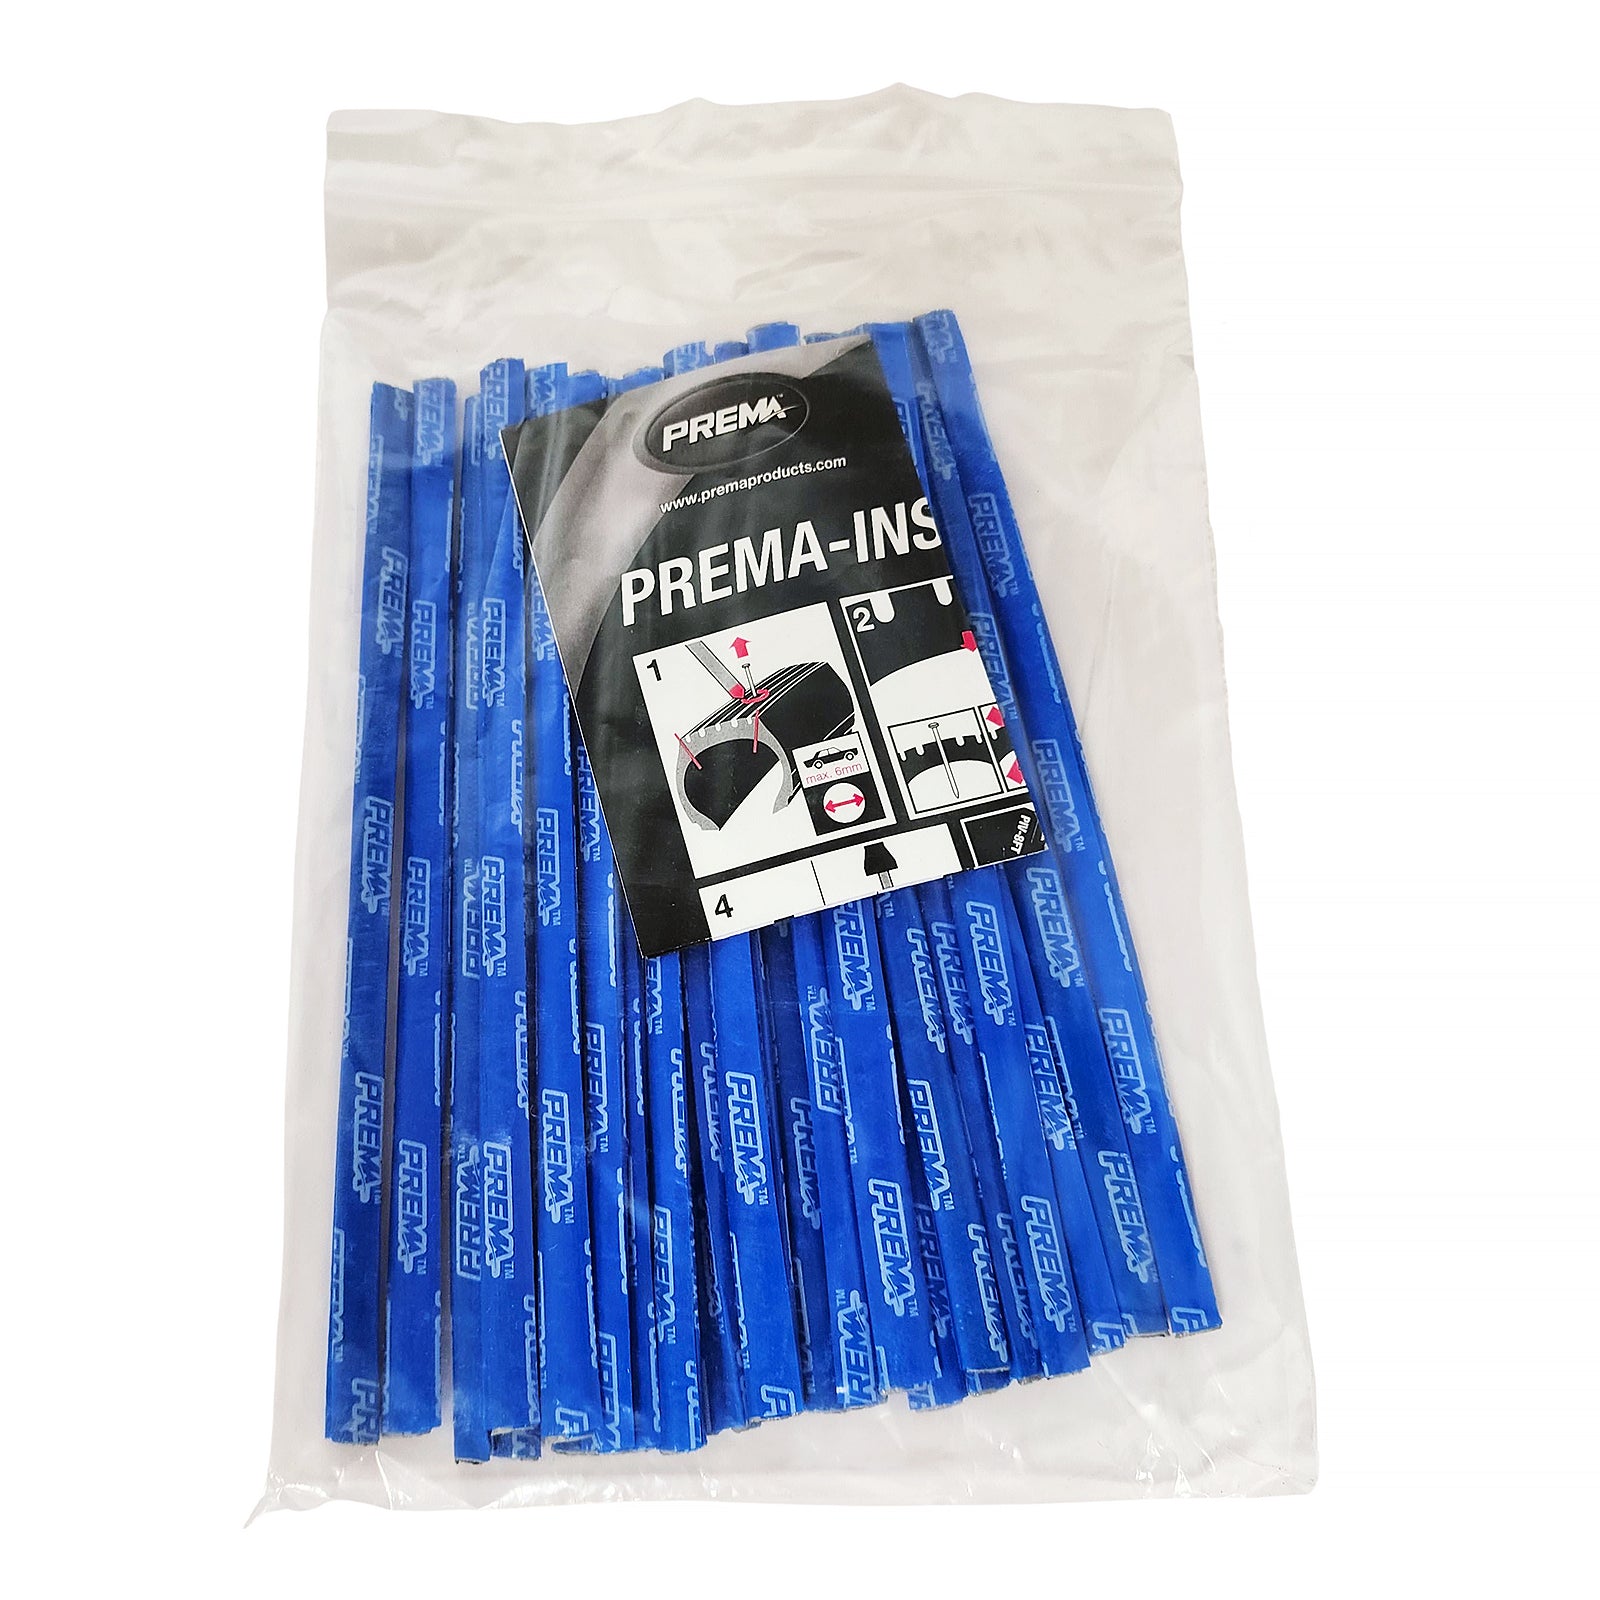 Prema PRI-4 Insert Repair, For 1/4" Hole, 7-1/2" Long, Reinforced Blue Poly Wrapped (25 bx)